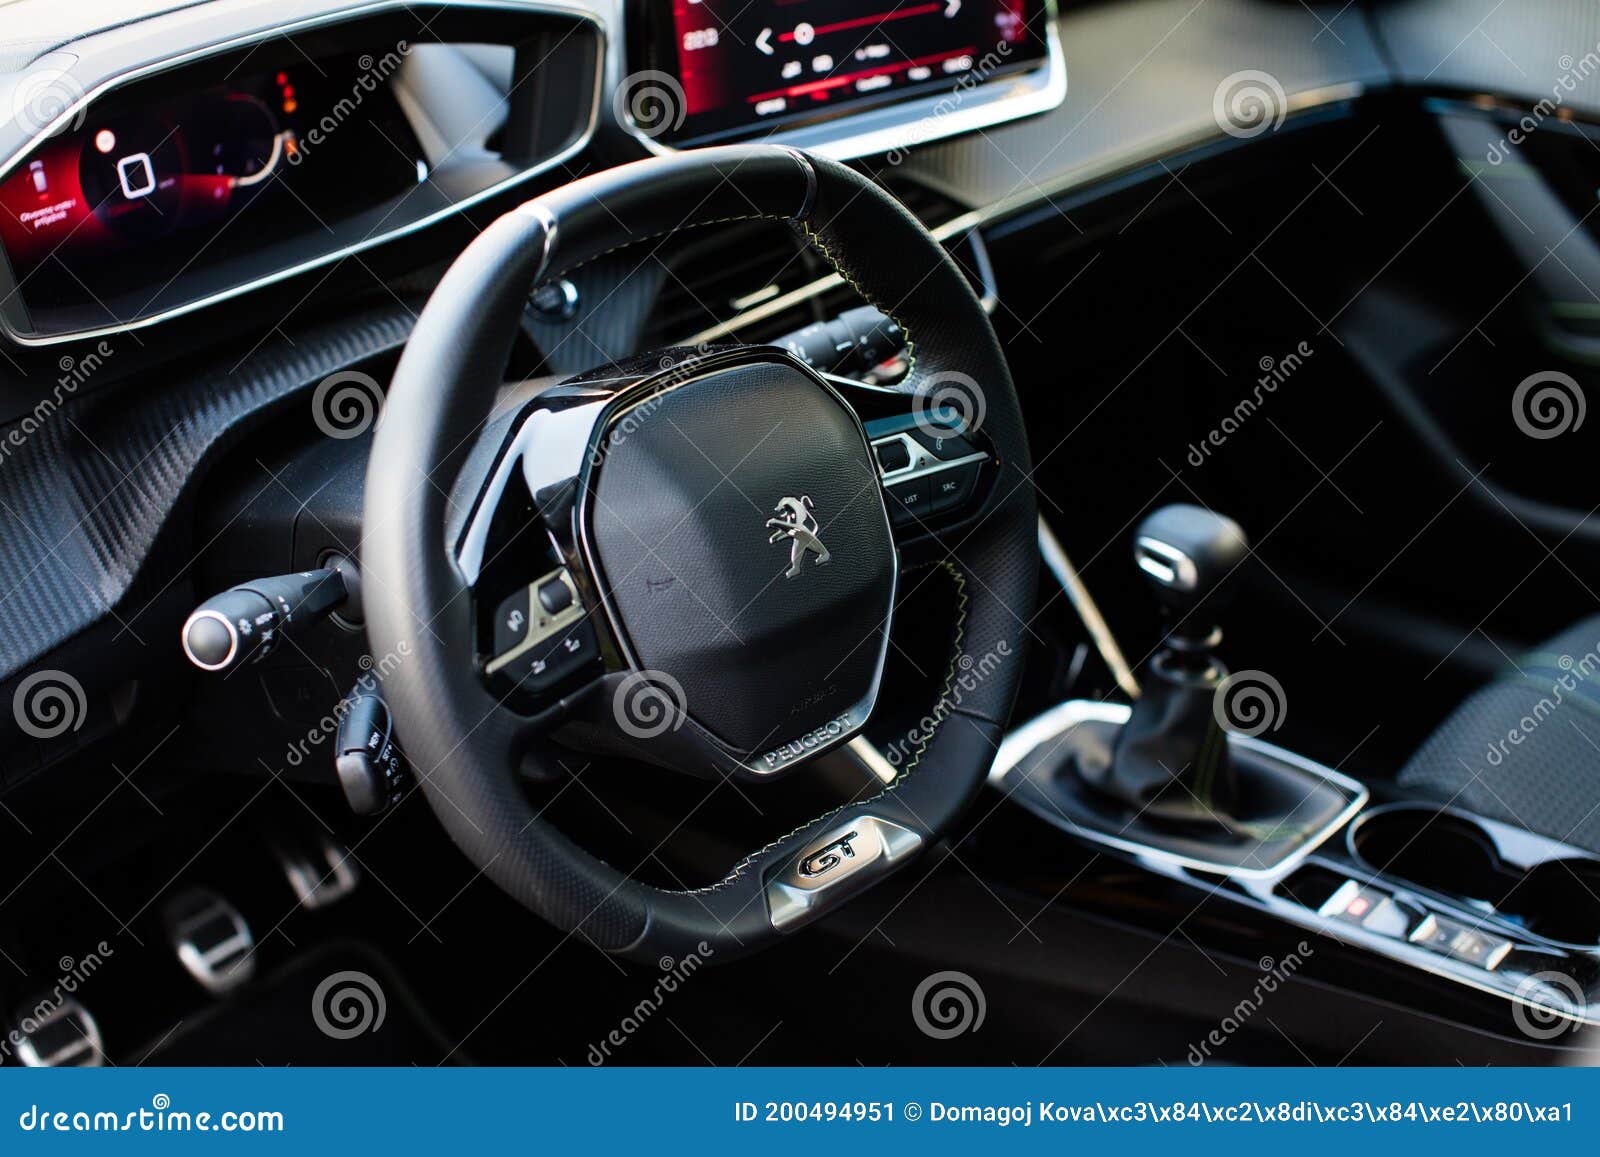 have fun Zoo Attach to New Peugeot 208 GT Line Interior Details Editorial Photo - Image of 2020,  details: 200494951